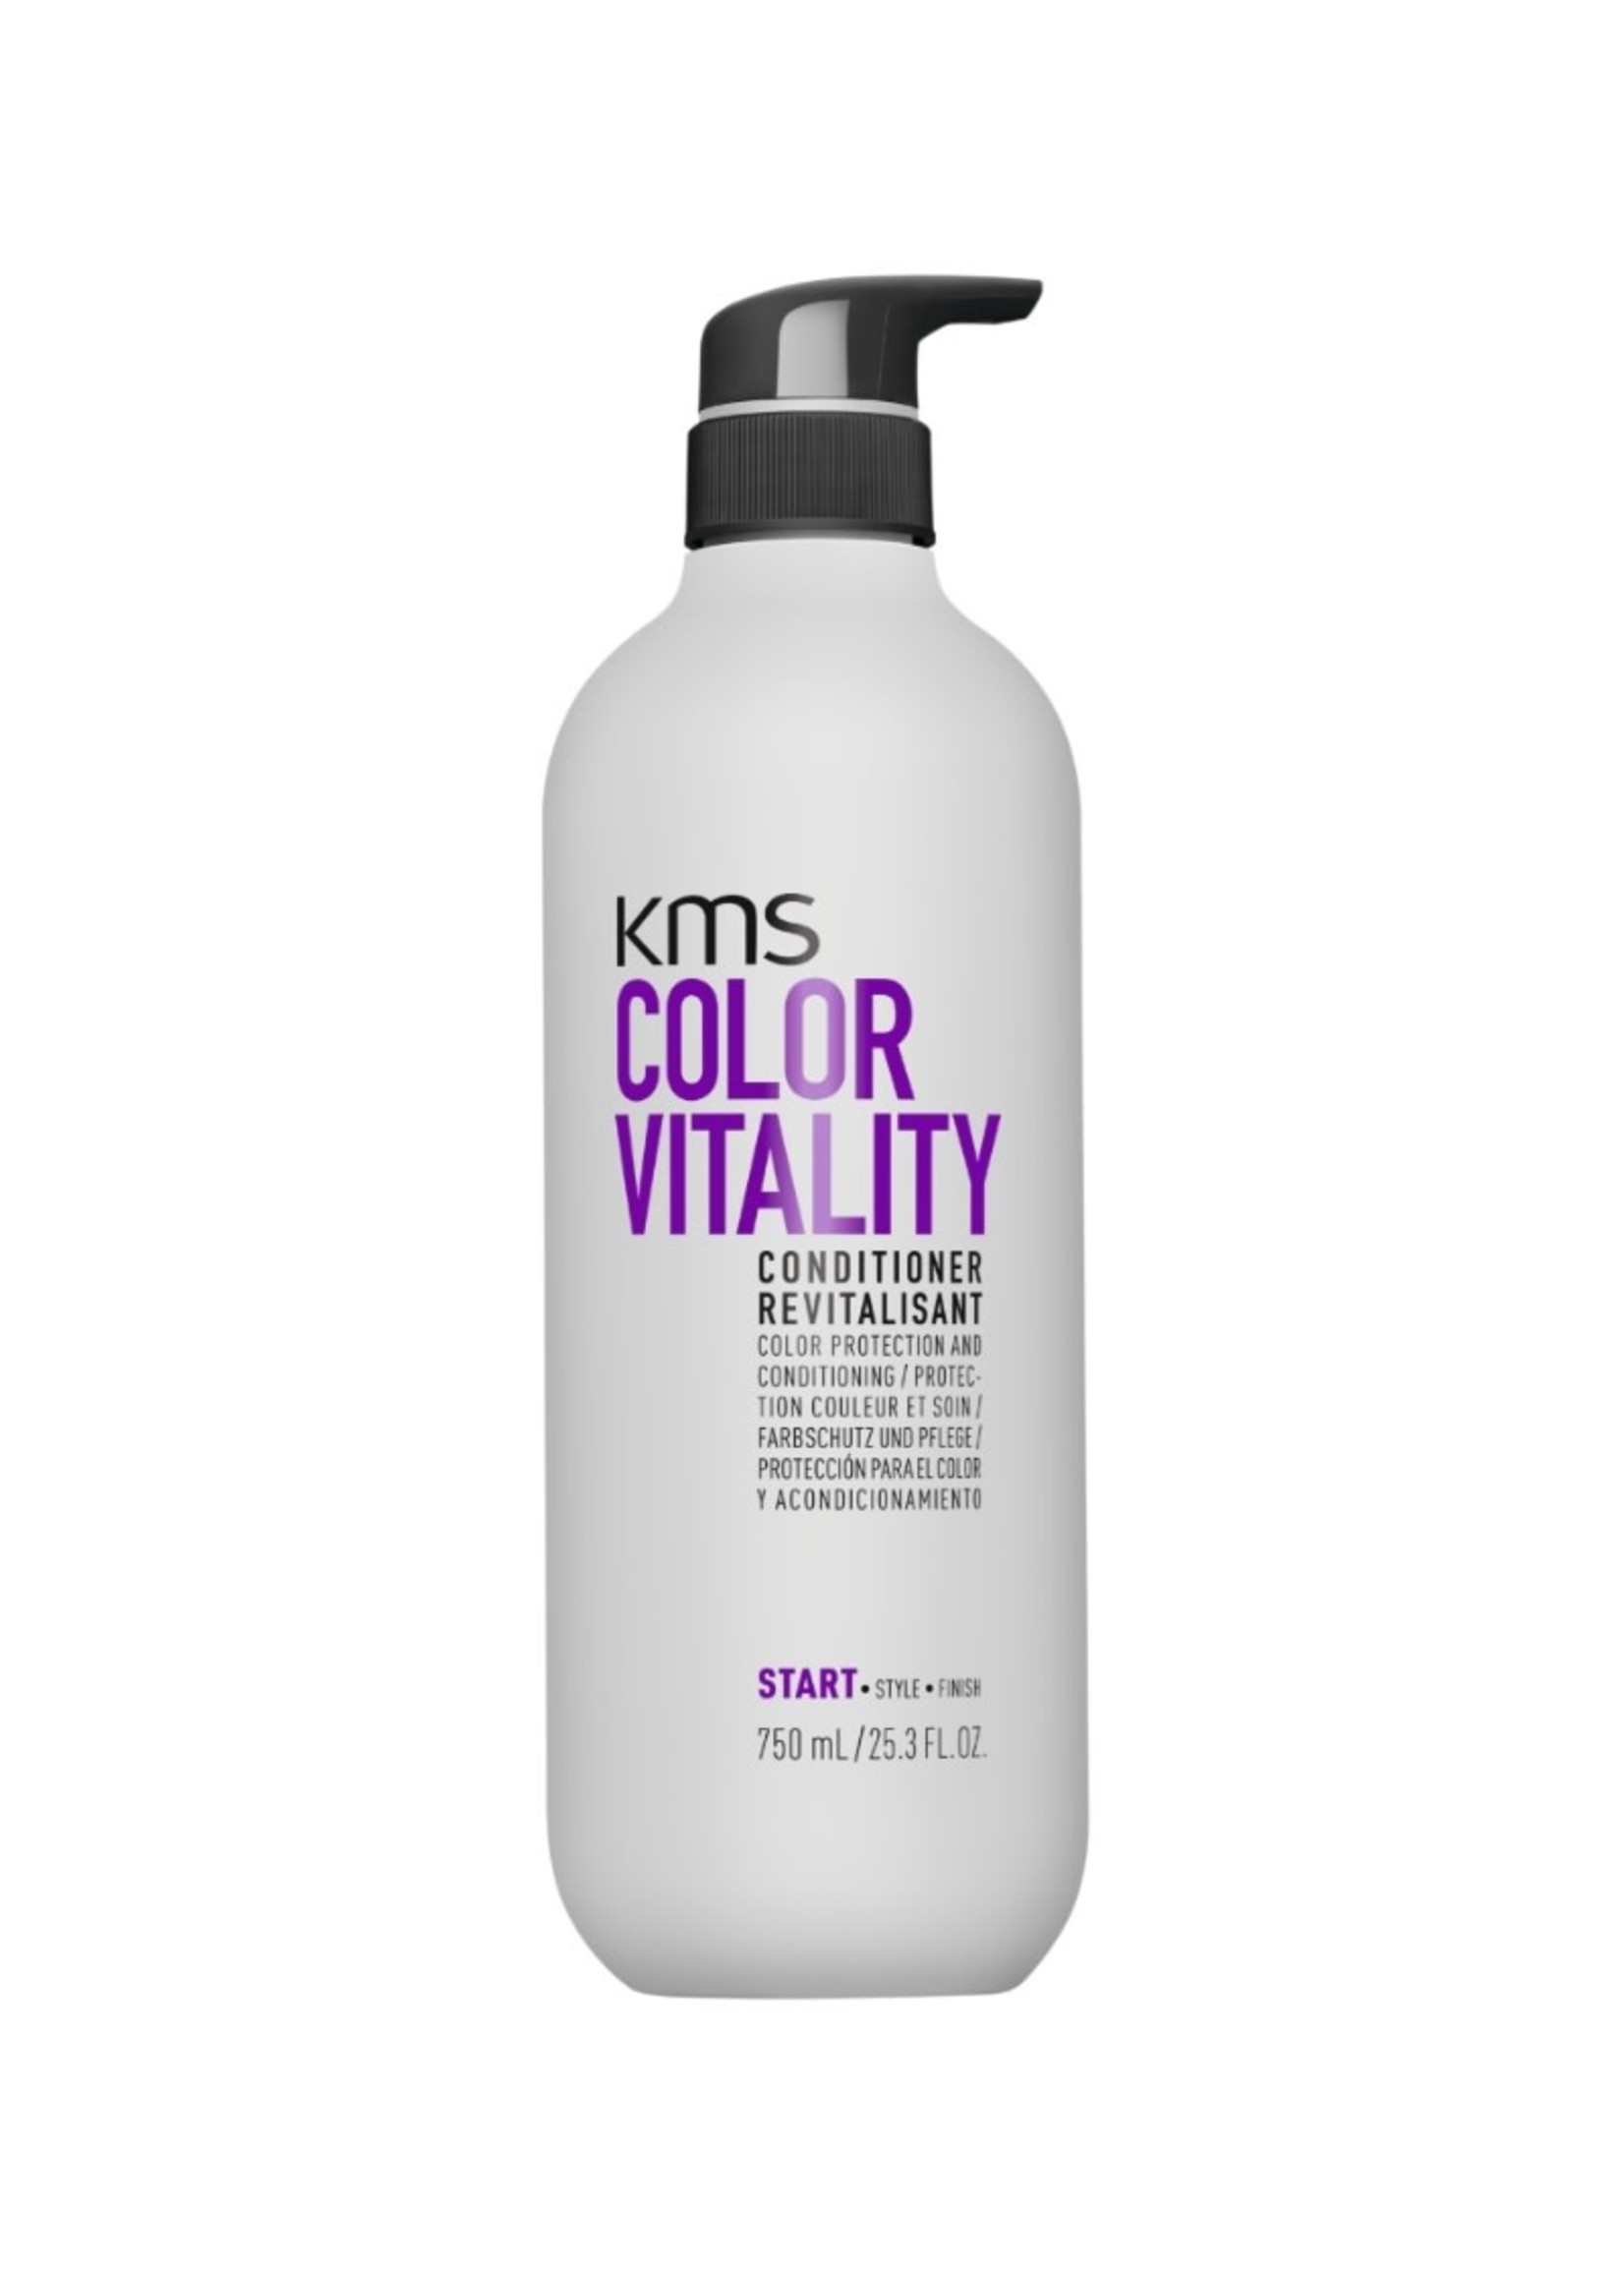 KMS KMS Colorvitality Conditioner 750ml